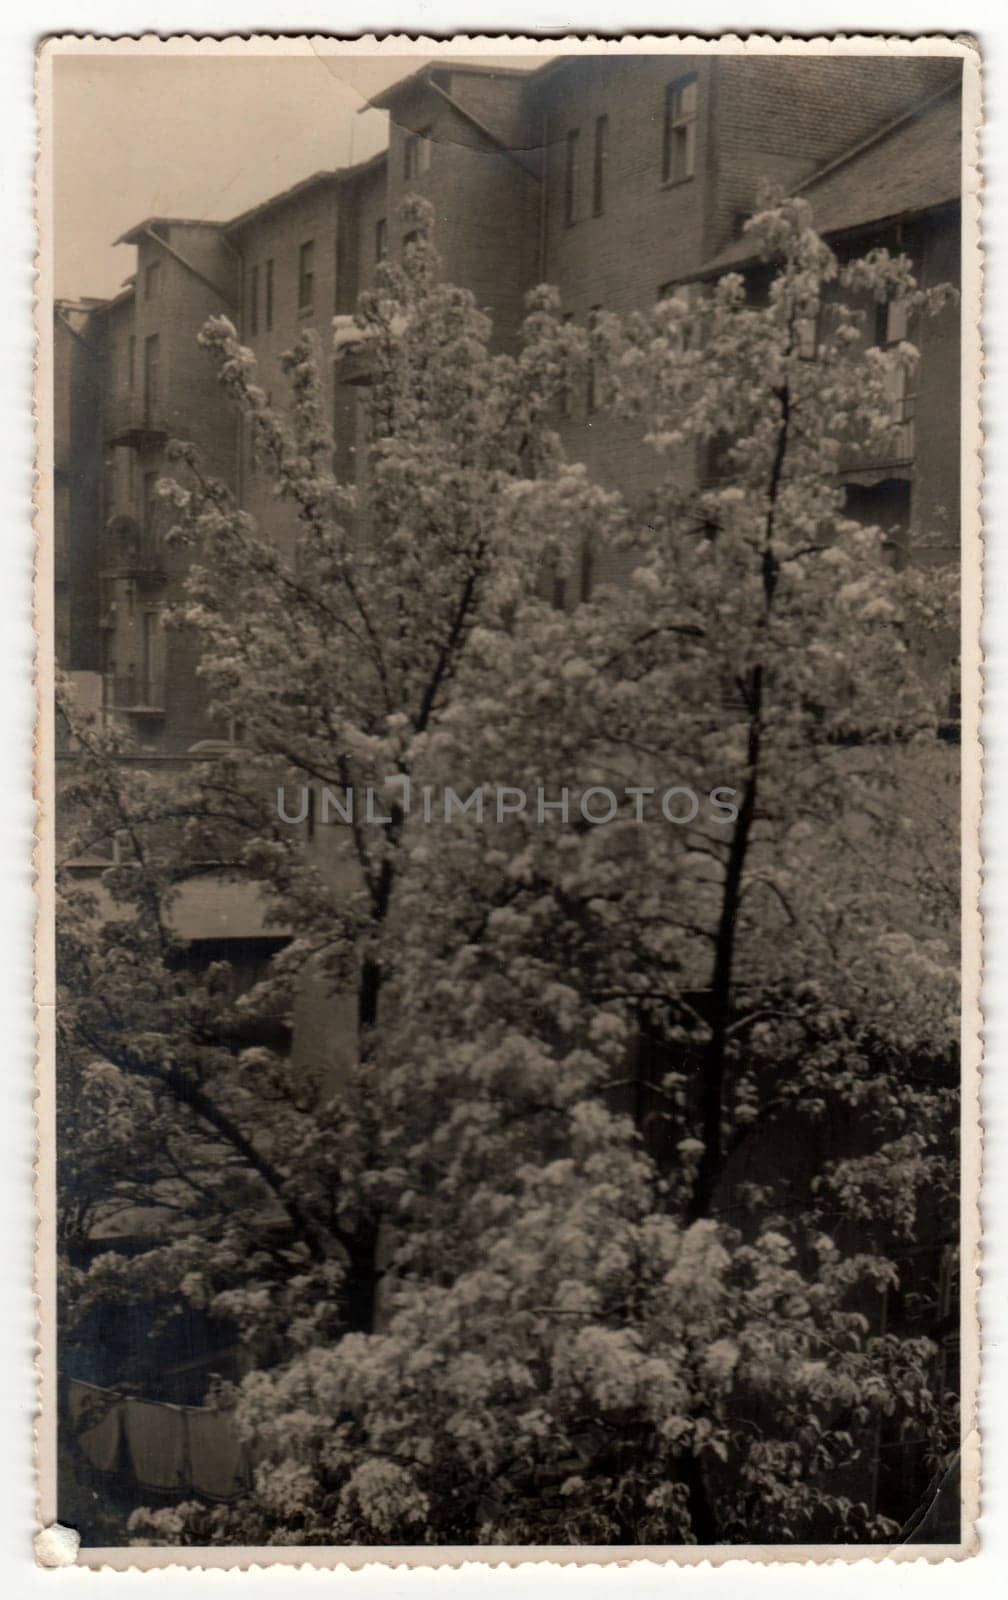 THE CZECHOSLOVAK REPUBLIC - MAY 1937: Vintage photo shows view from window at blooming trees. Retro black and white photography.